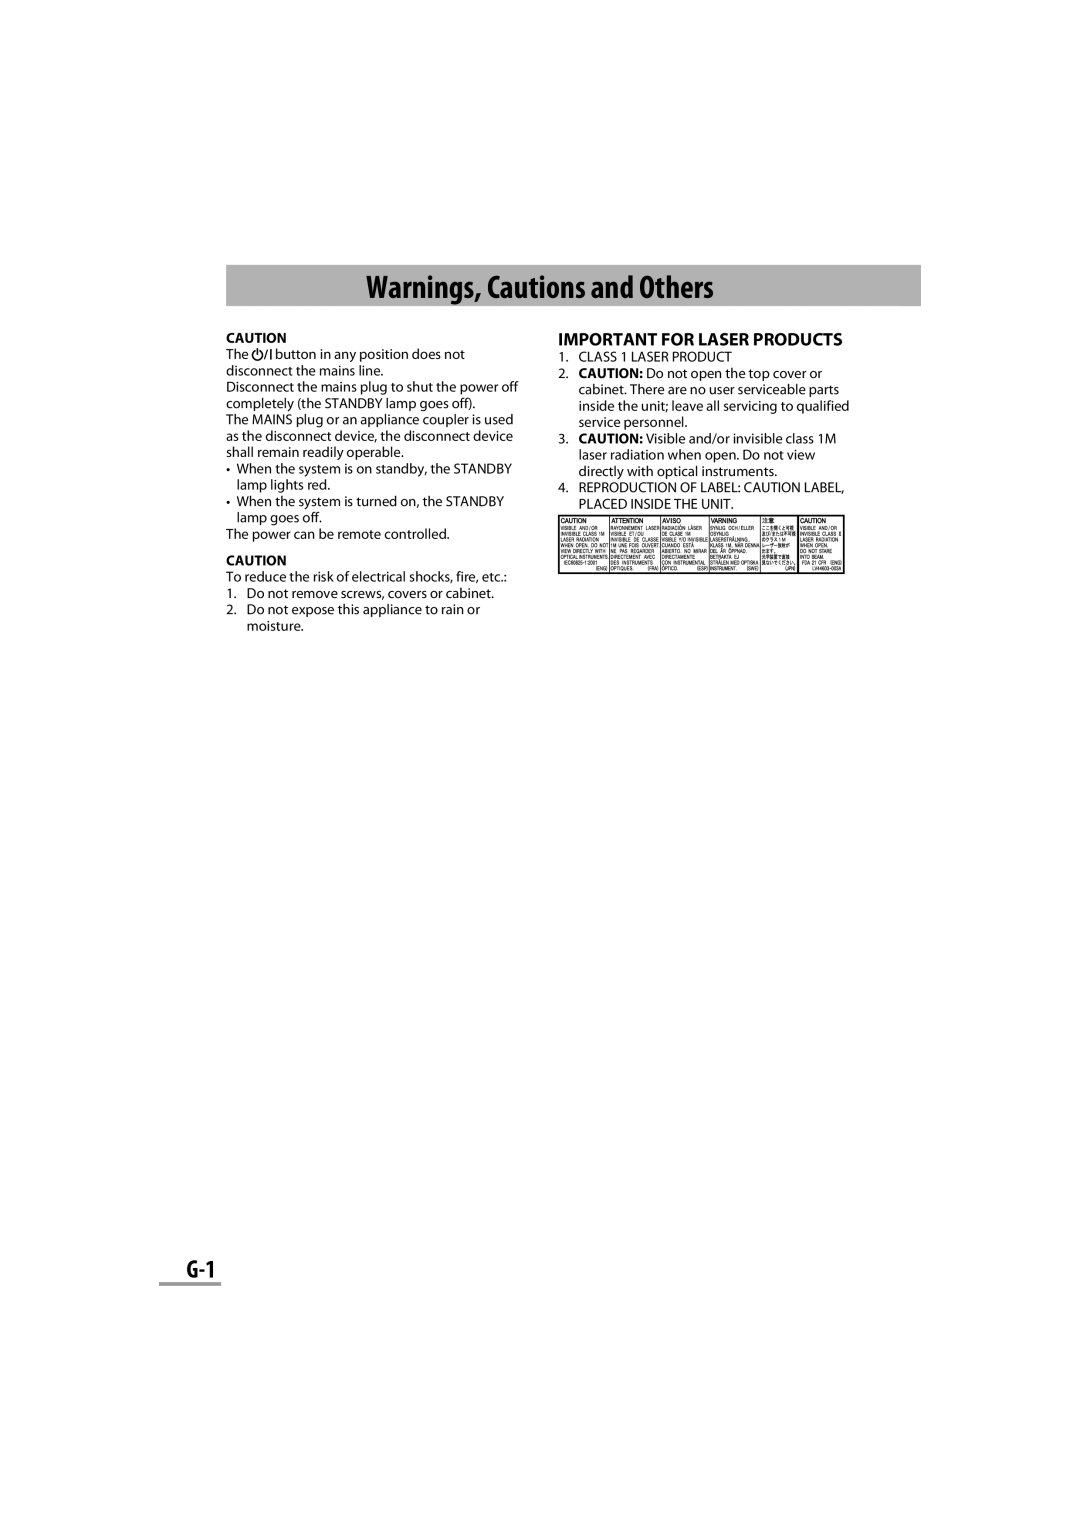 JVC CA-NXG9 manual Warnings, Cautions and Others, Important For Laser Products 